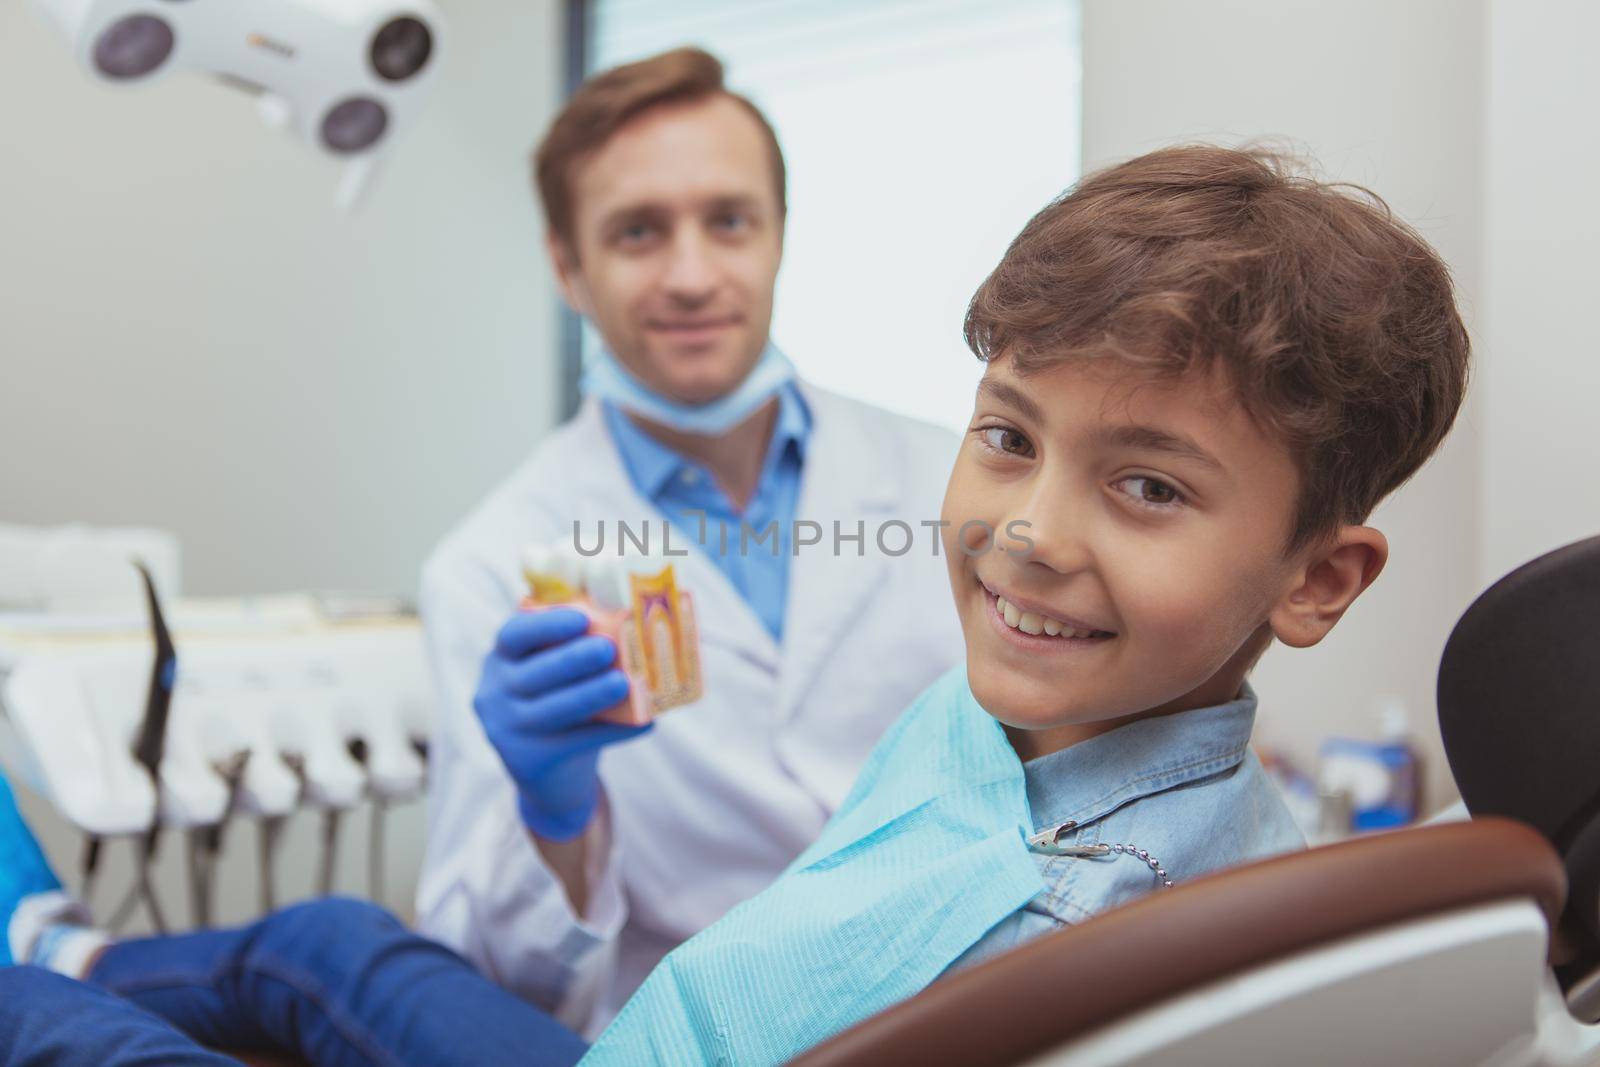 Healthy teeth, children concept. Adorable happy boy smiling to the camera while sitting in a dentist chair, dentist smiling on the background